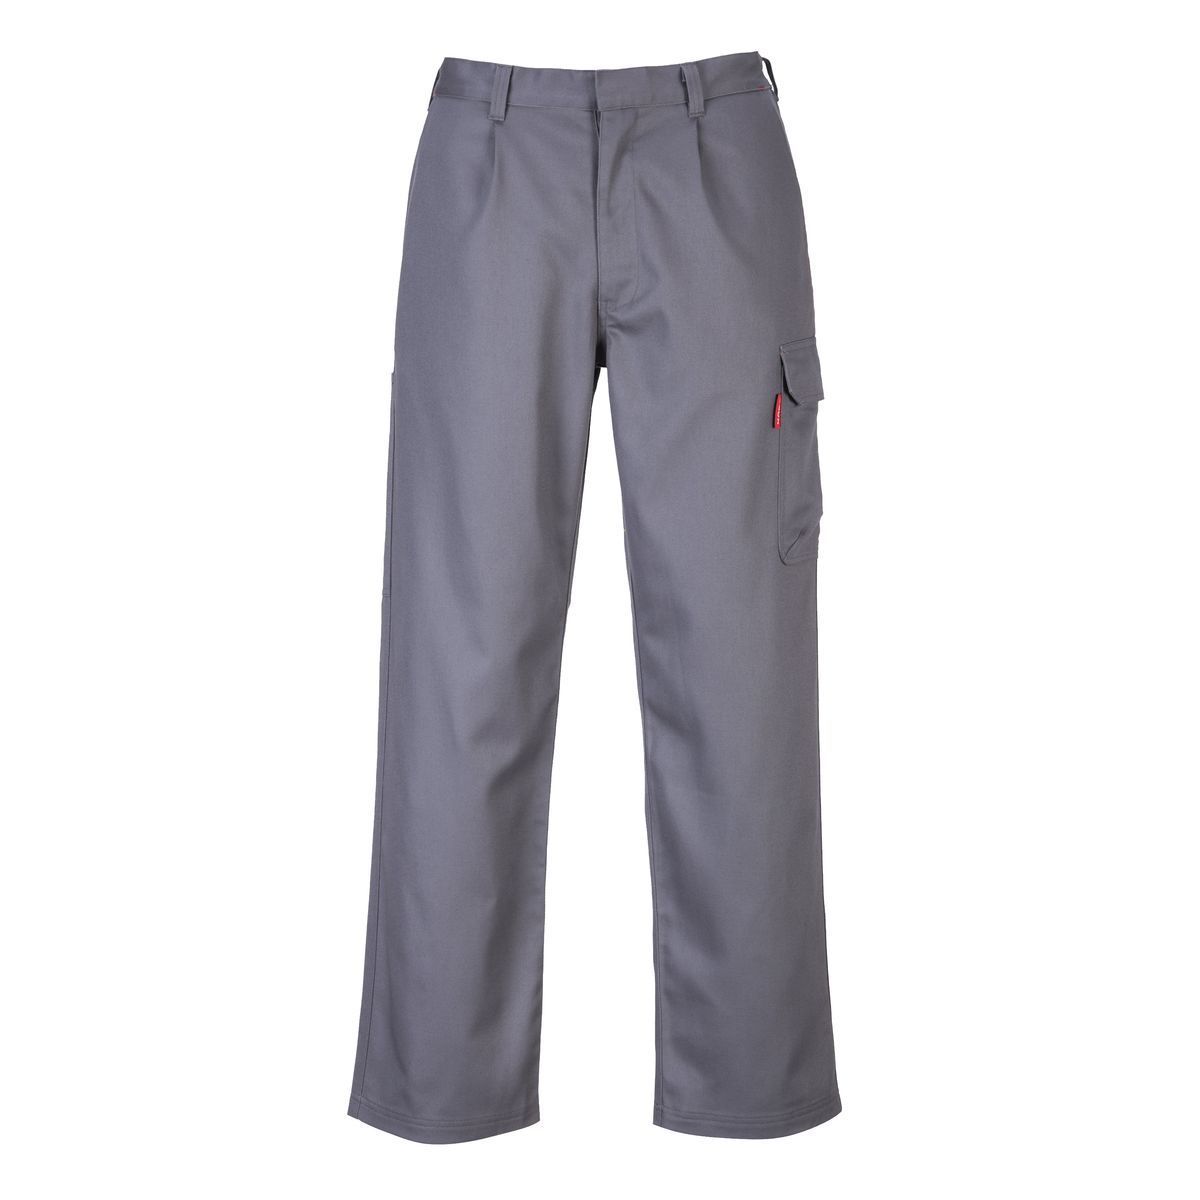 Work Pants Trousers, PPE